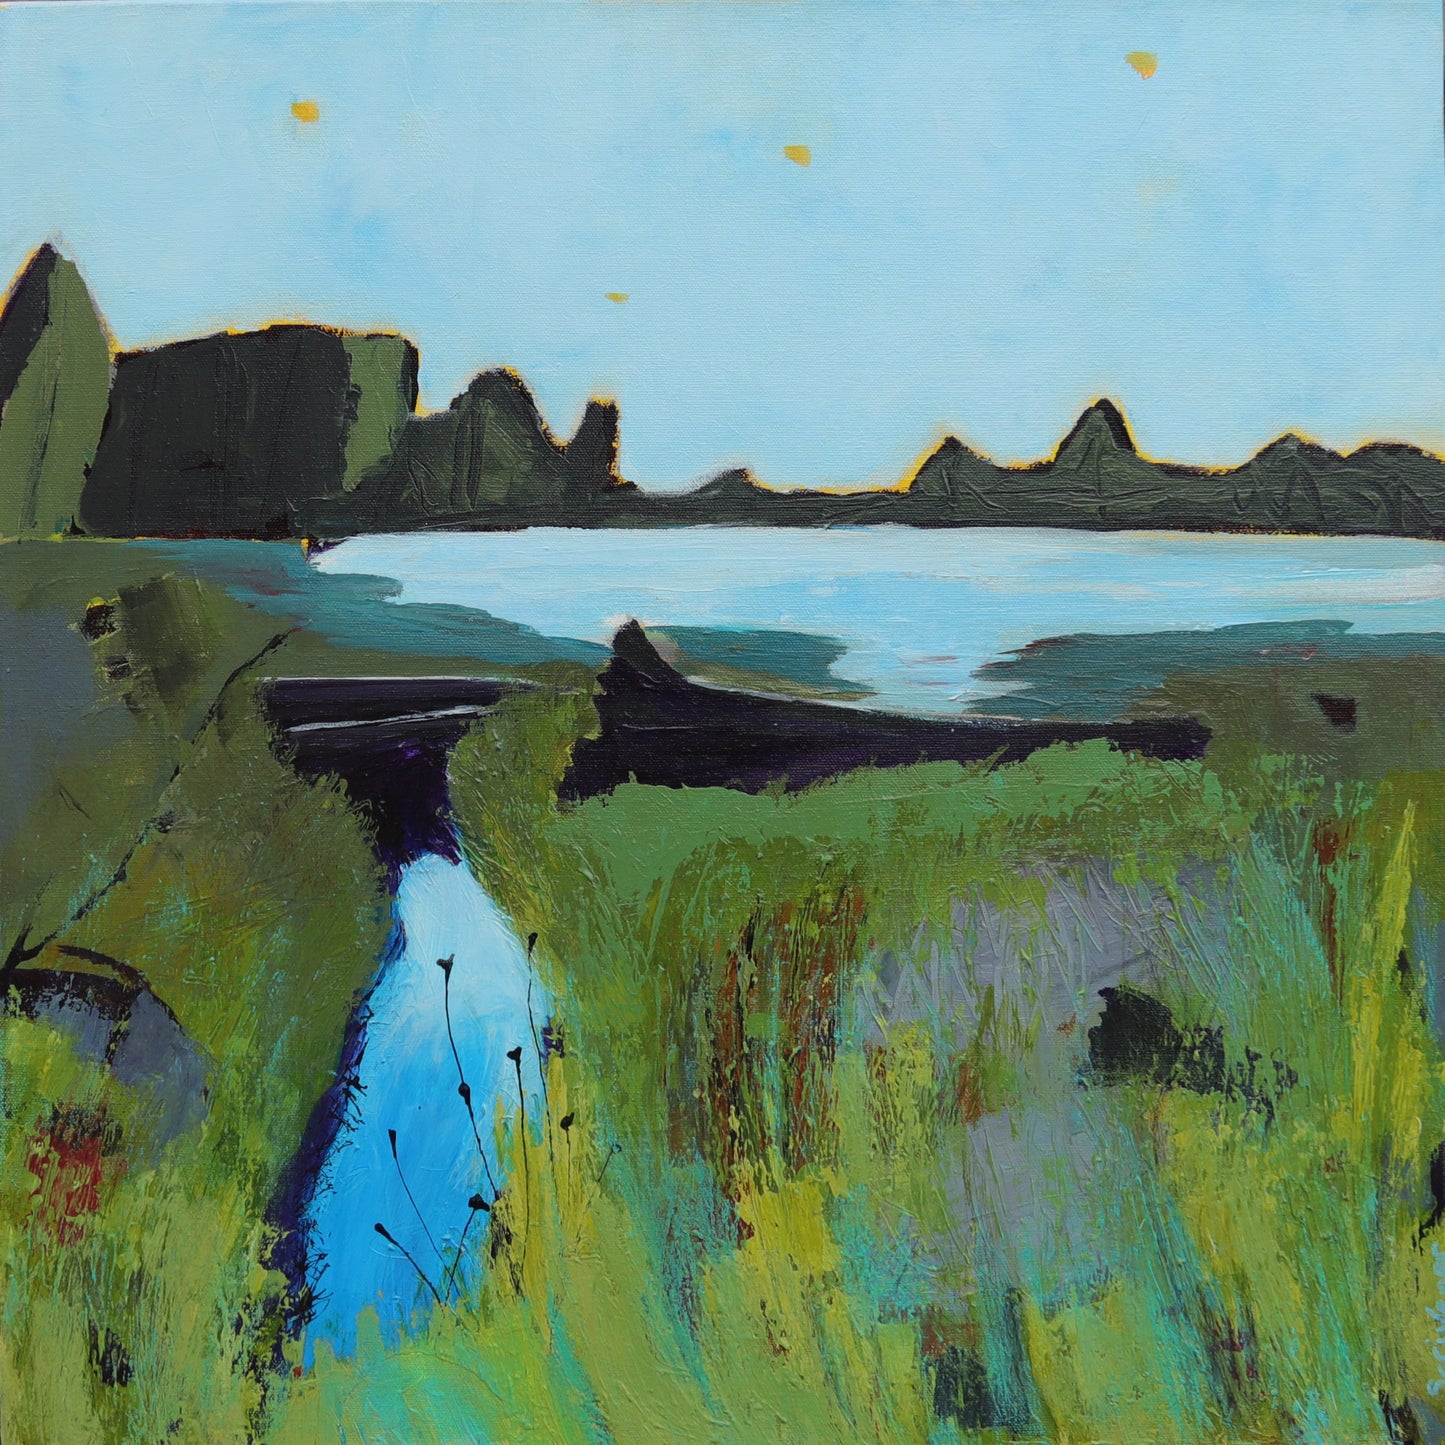 SIMPLIFY THE LANDSCAPE in Acrylic/Mixed Media -APRIL 30/MAY 1 -2 DAY WORKSHOP